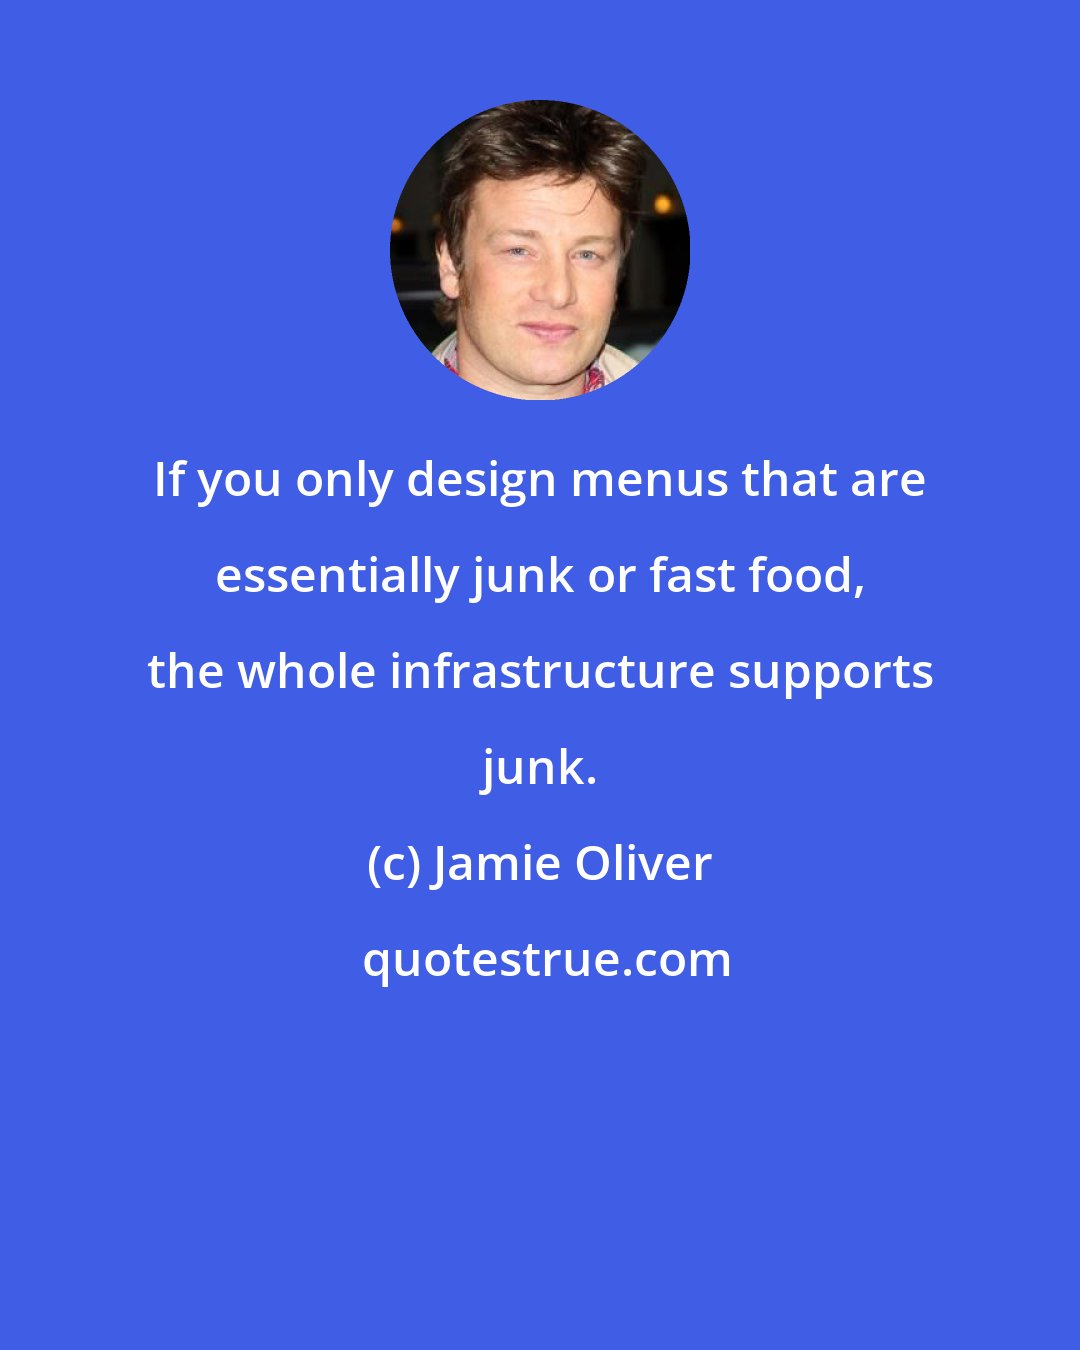 Jamie Oliver: If you only design menus that are essentially junk or fast food, the whole infrastructure supports junk.